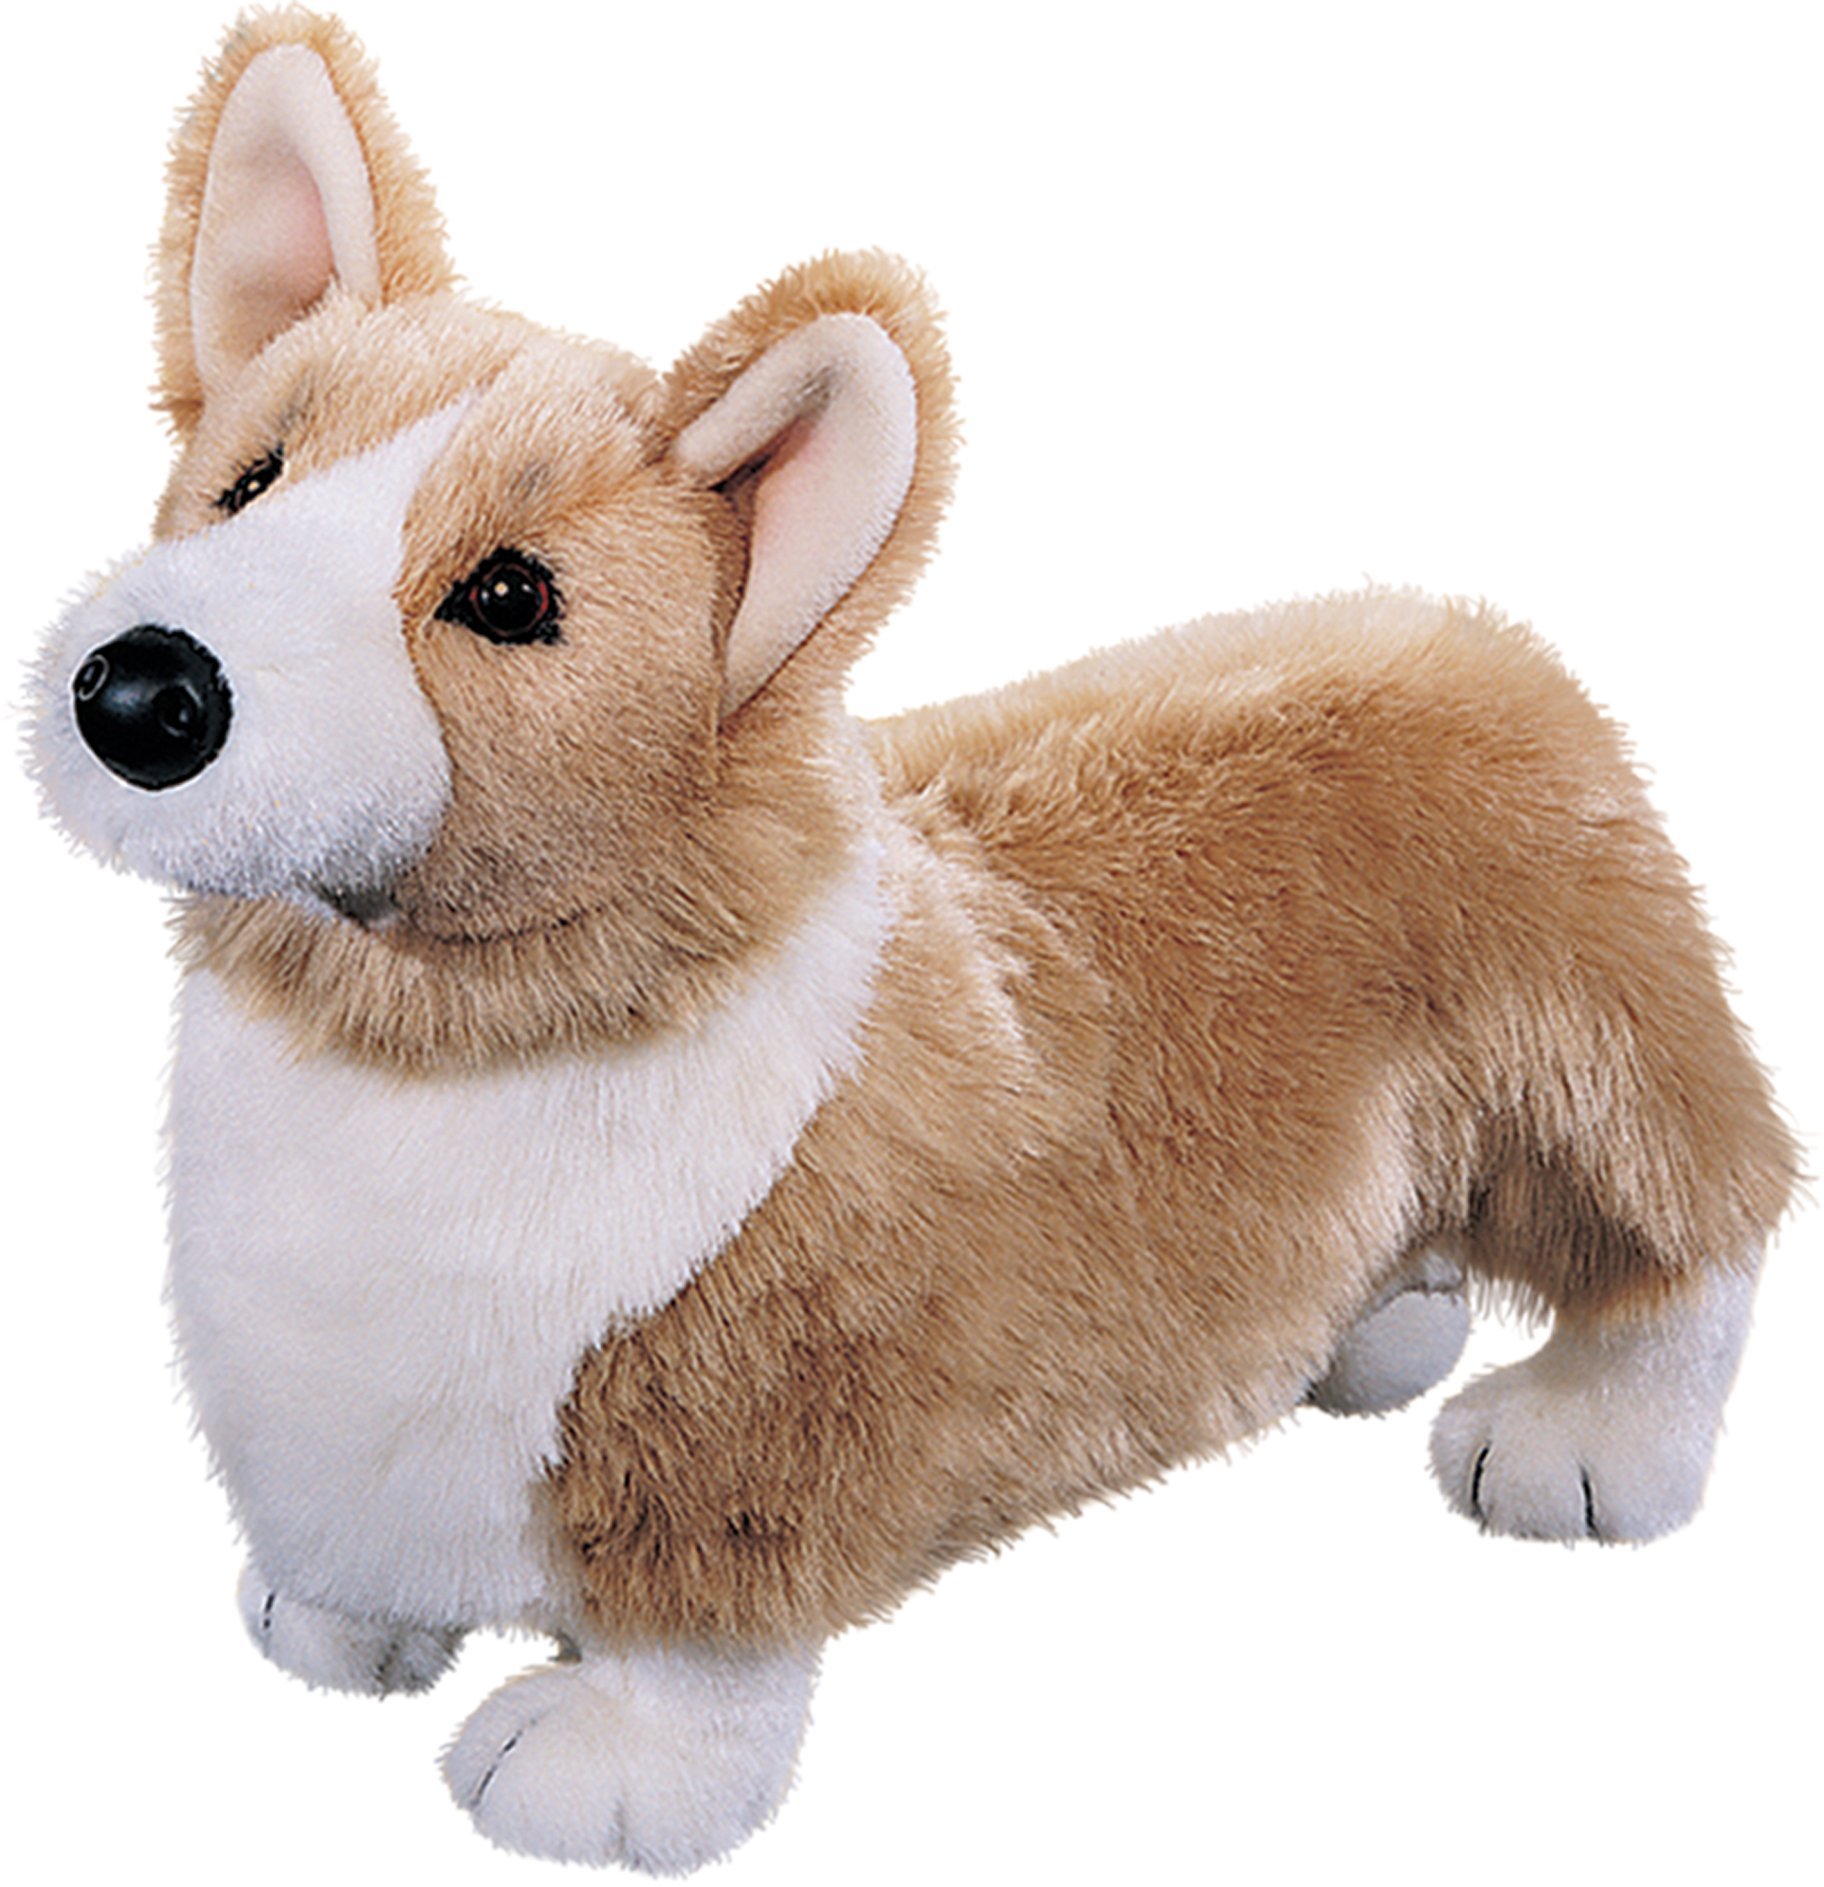 stuffed animals that look real